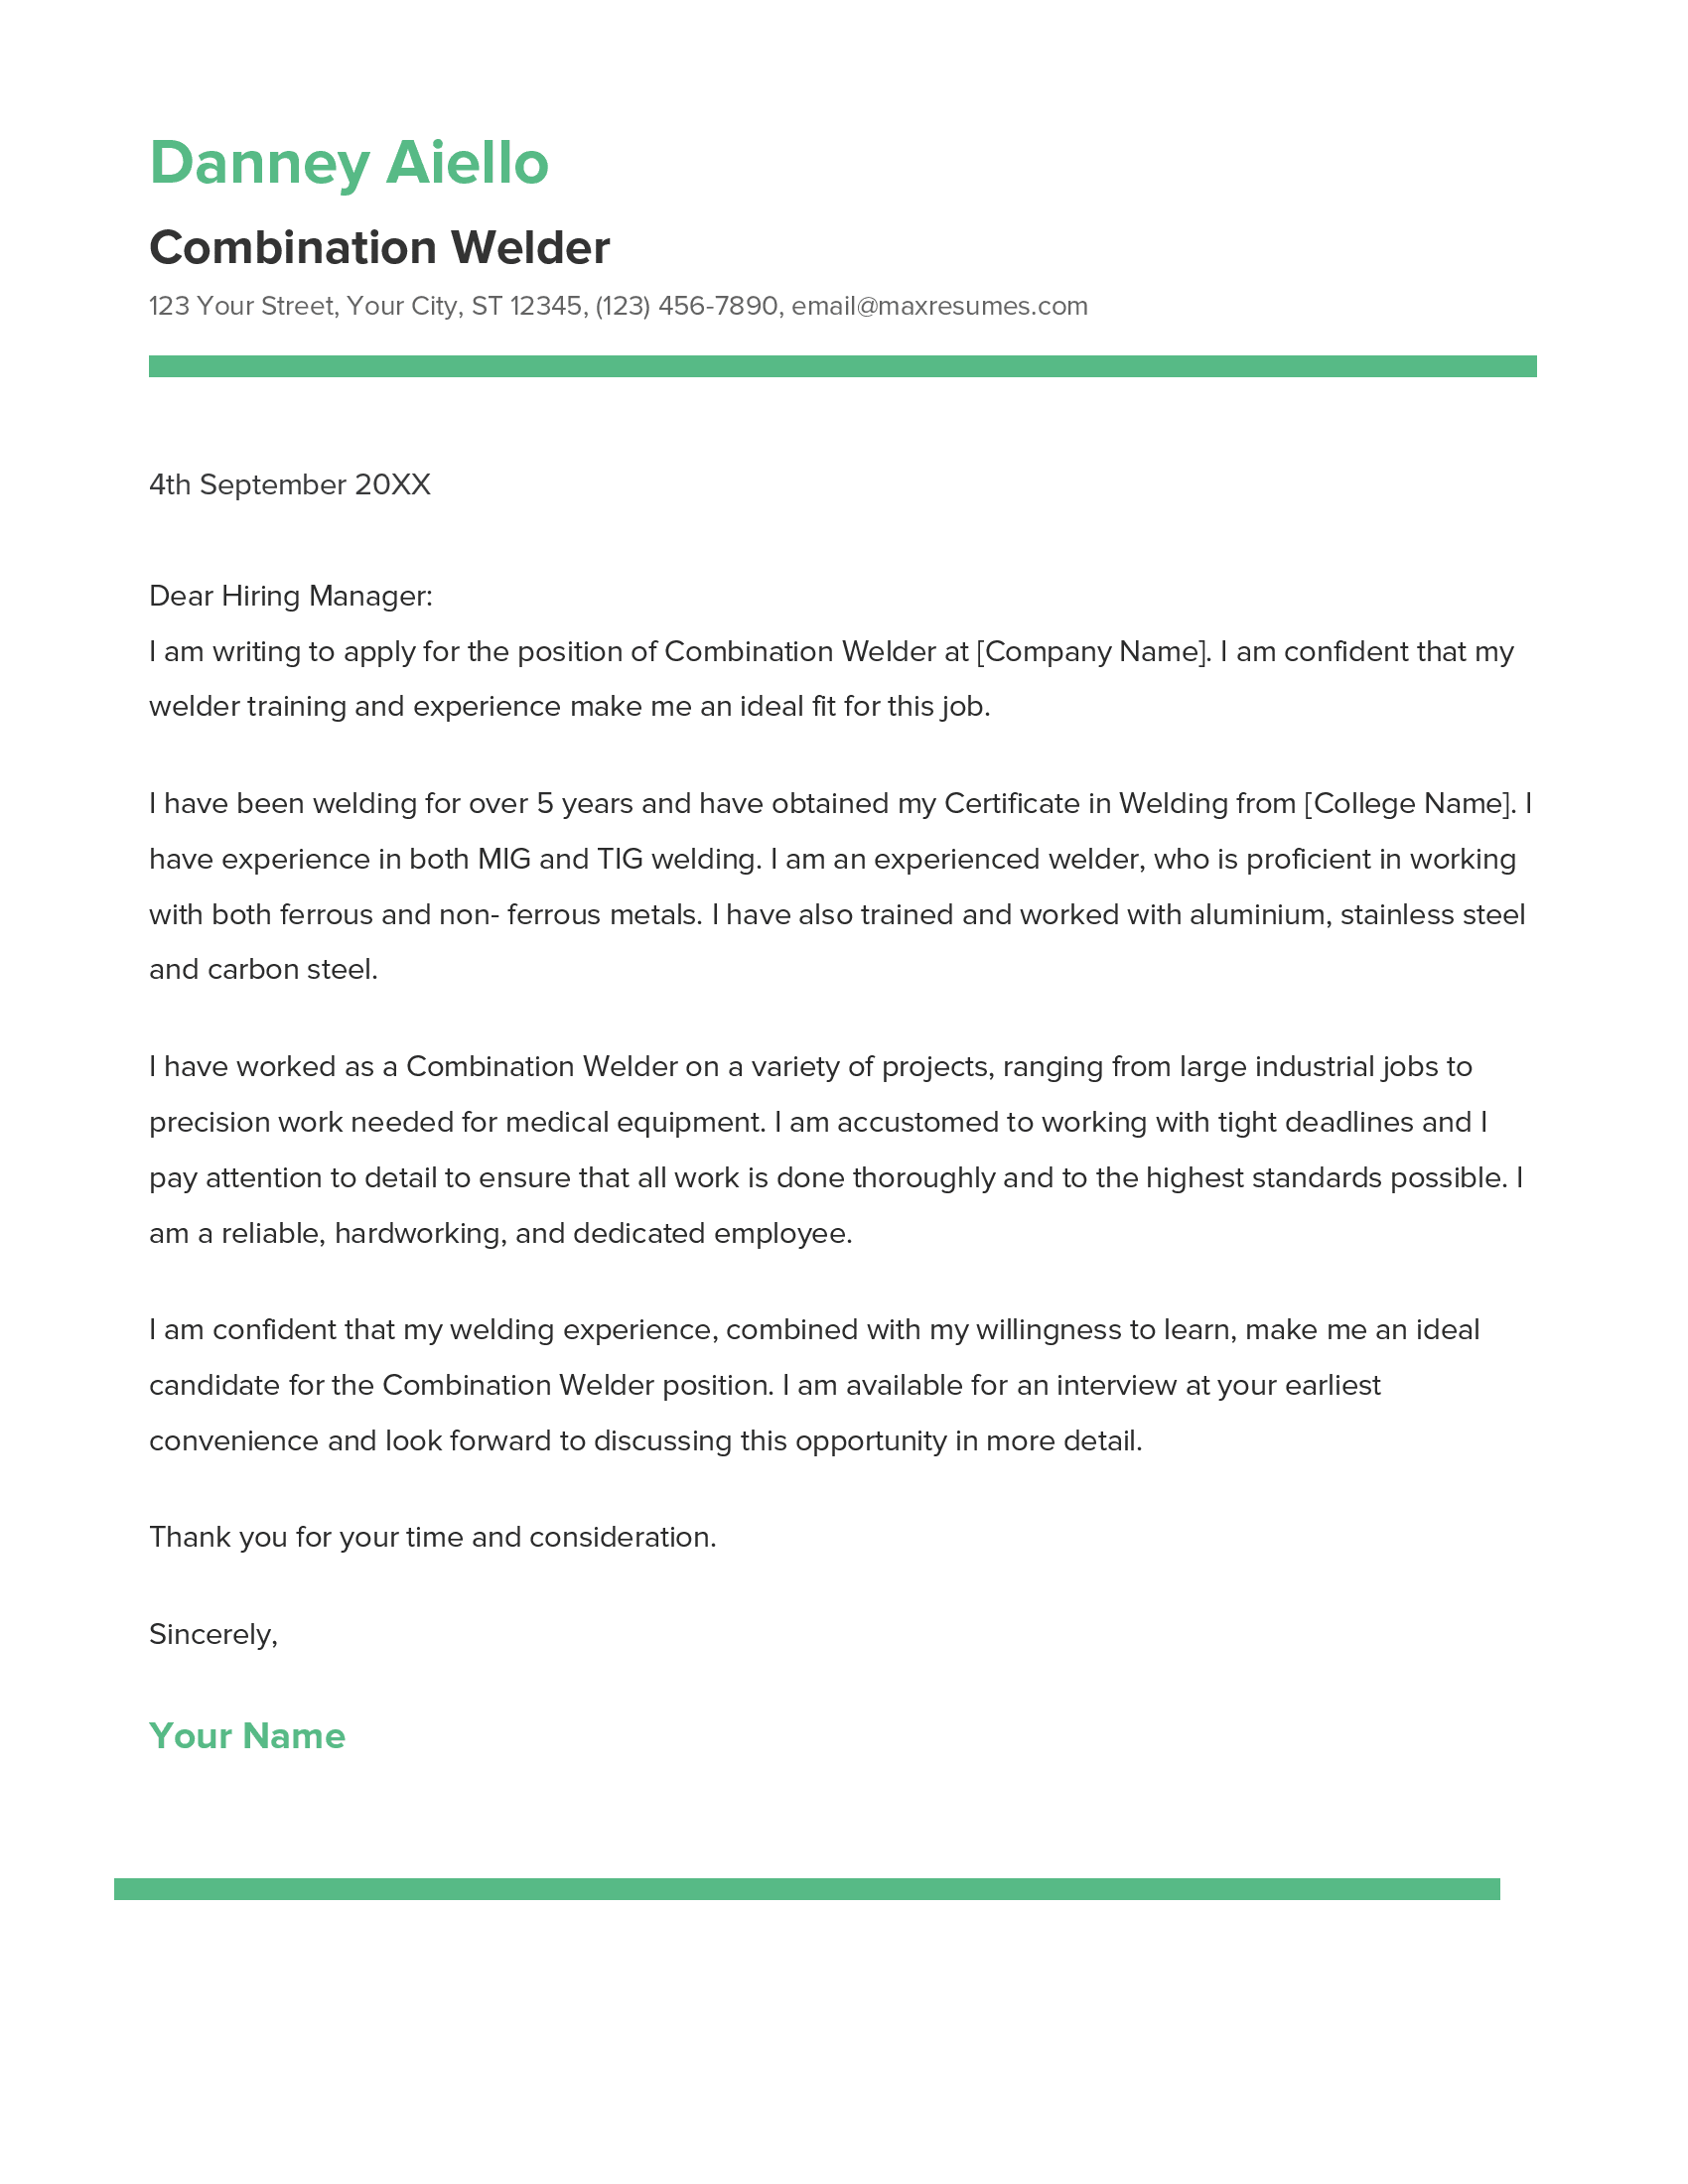 Combination Welder Cover Letter Example